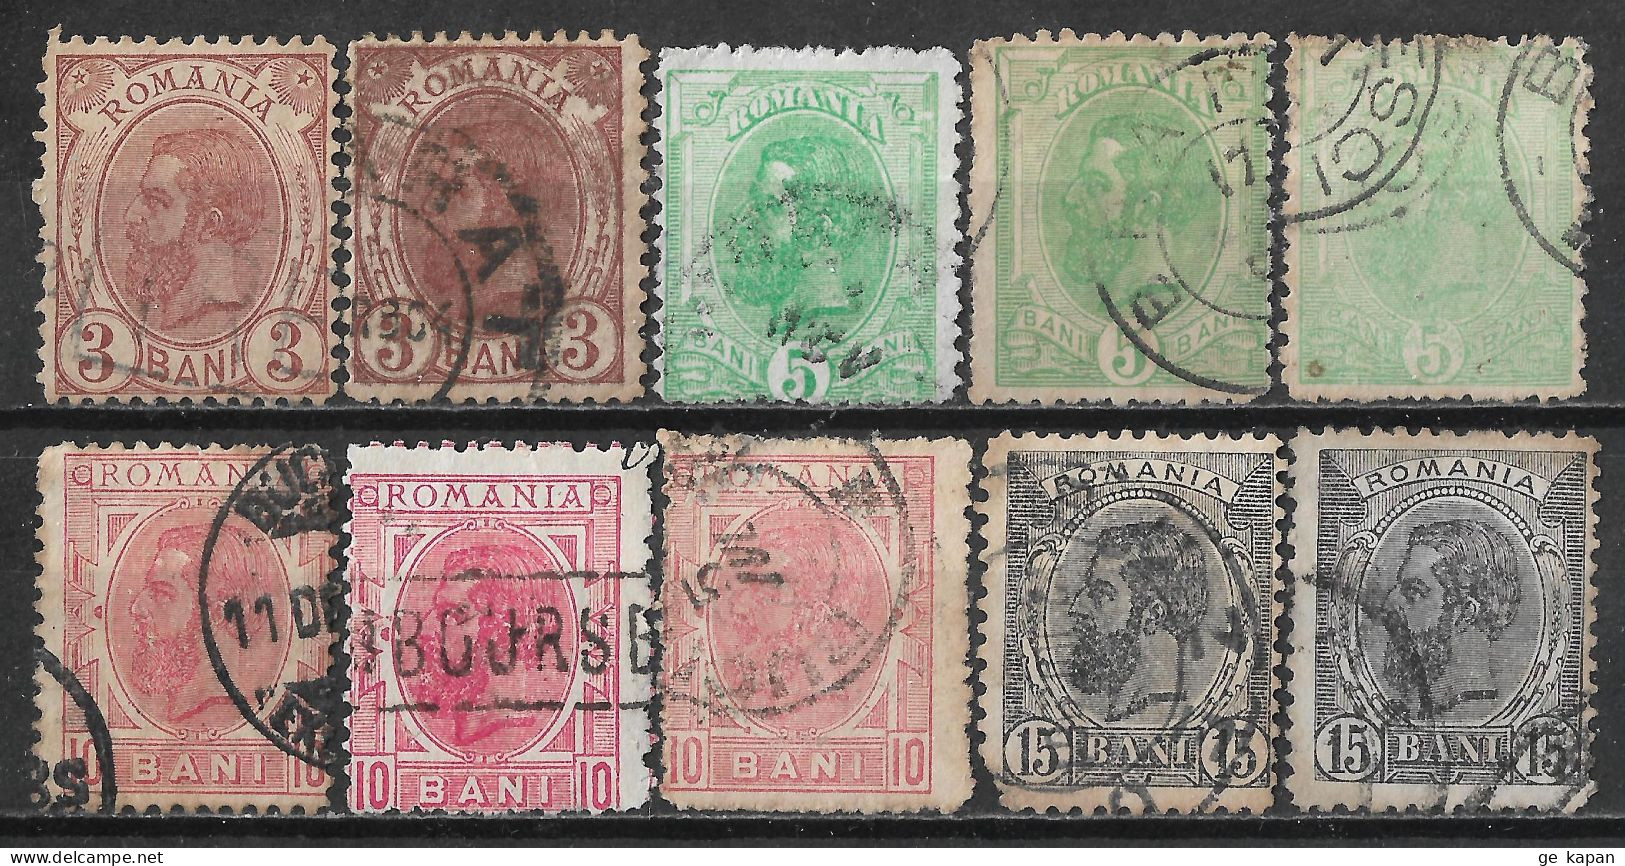 1900 ROMANIA SET OF 10 USED STAMPS (Scott # 135-138) CV $9.70 - Used Stamps